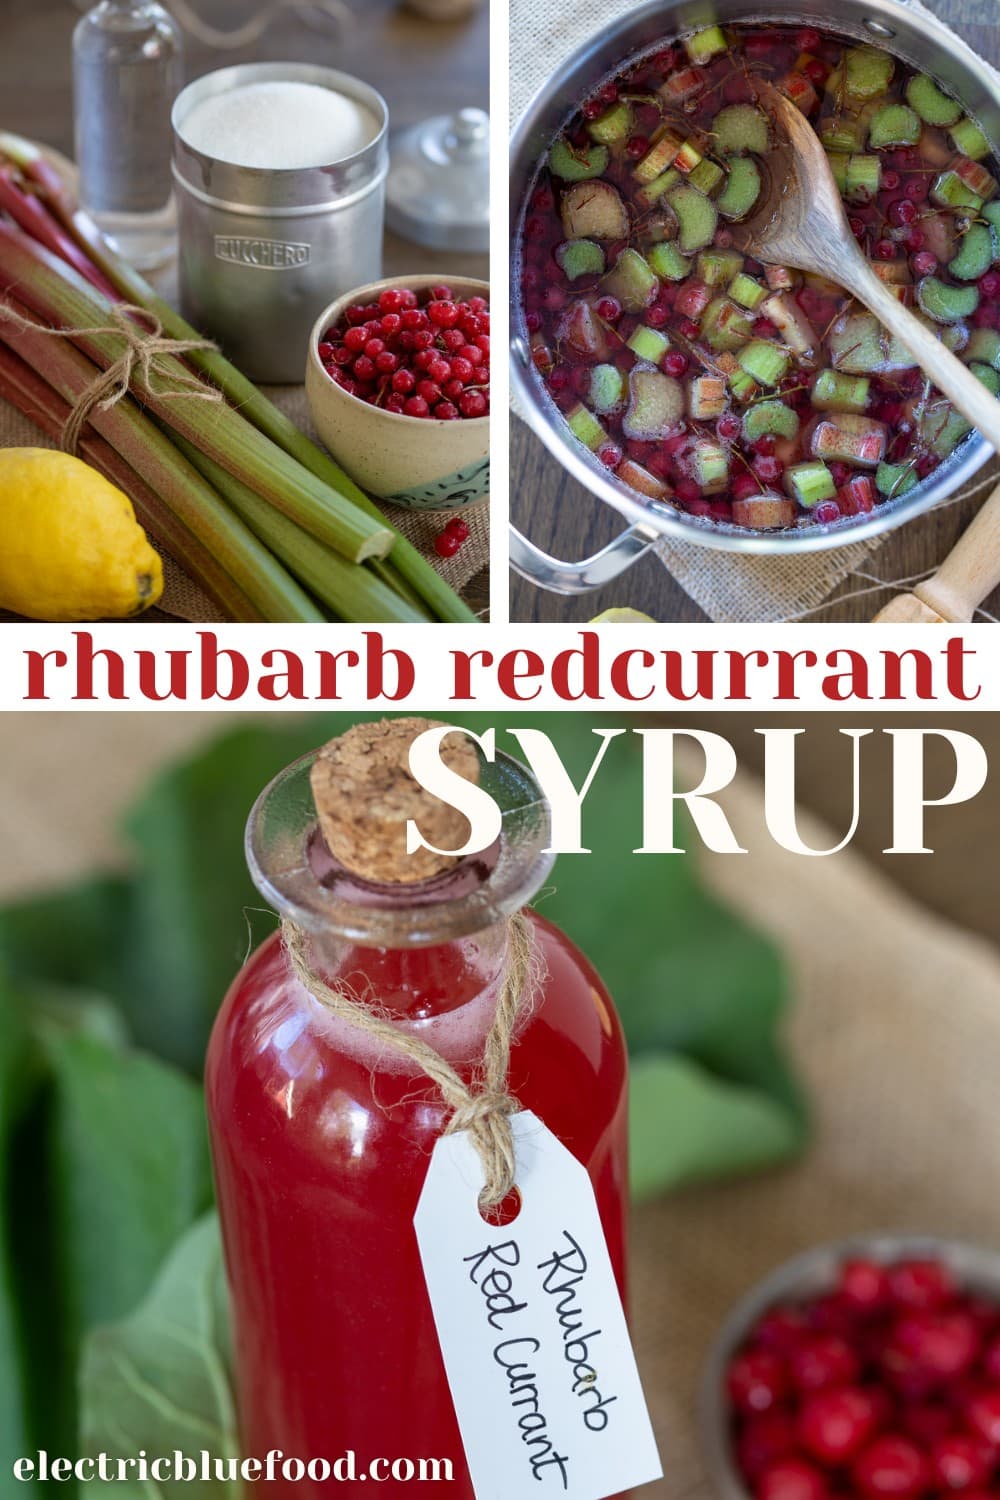 Homemade rhubarb and redcurrant syrup to use in drinks, cocktails or even to flavour hot tea.